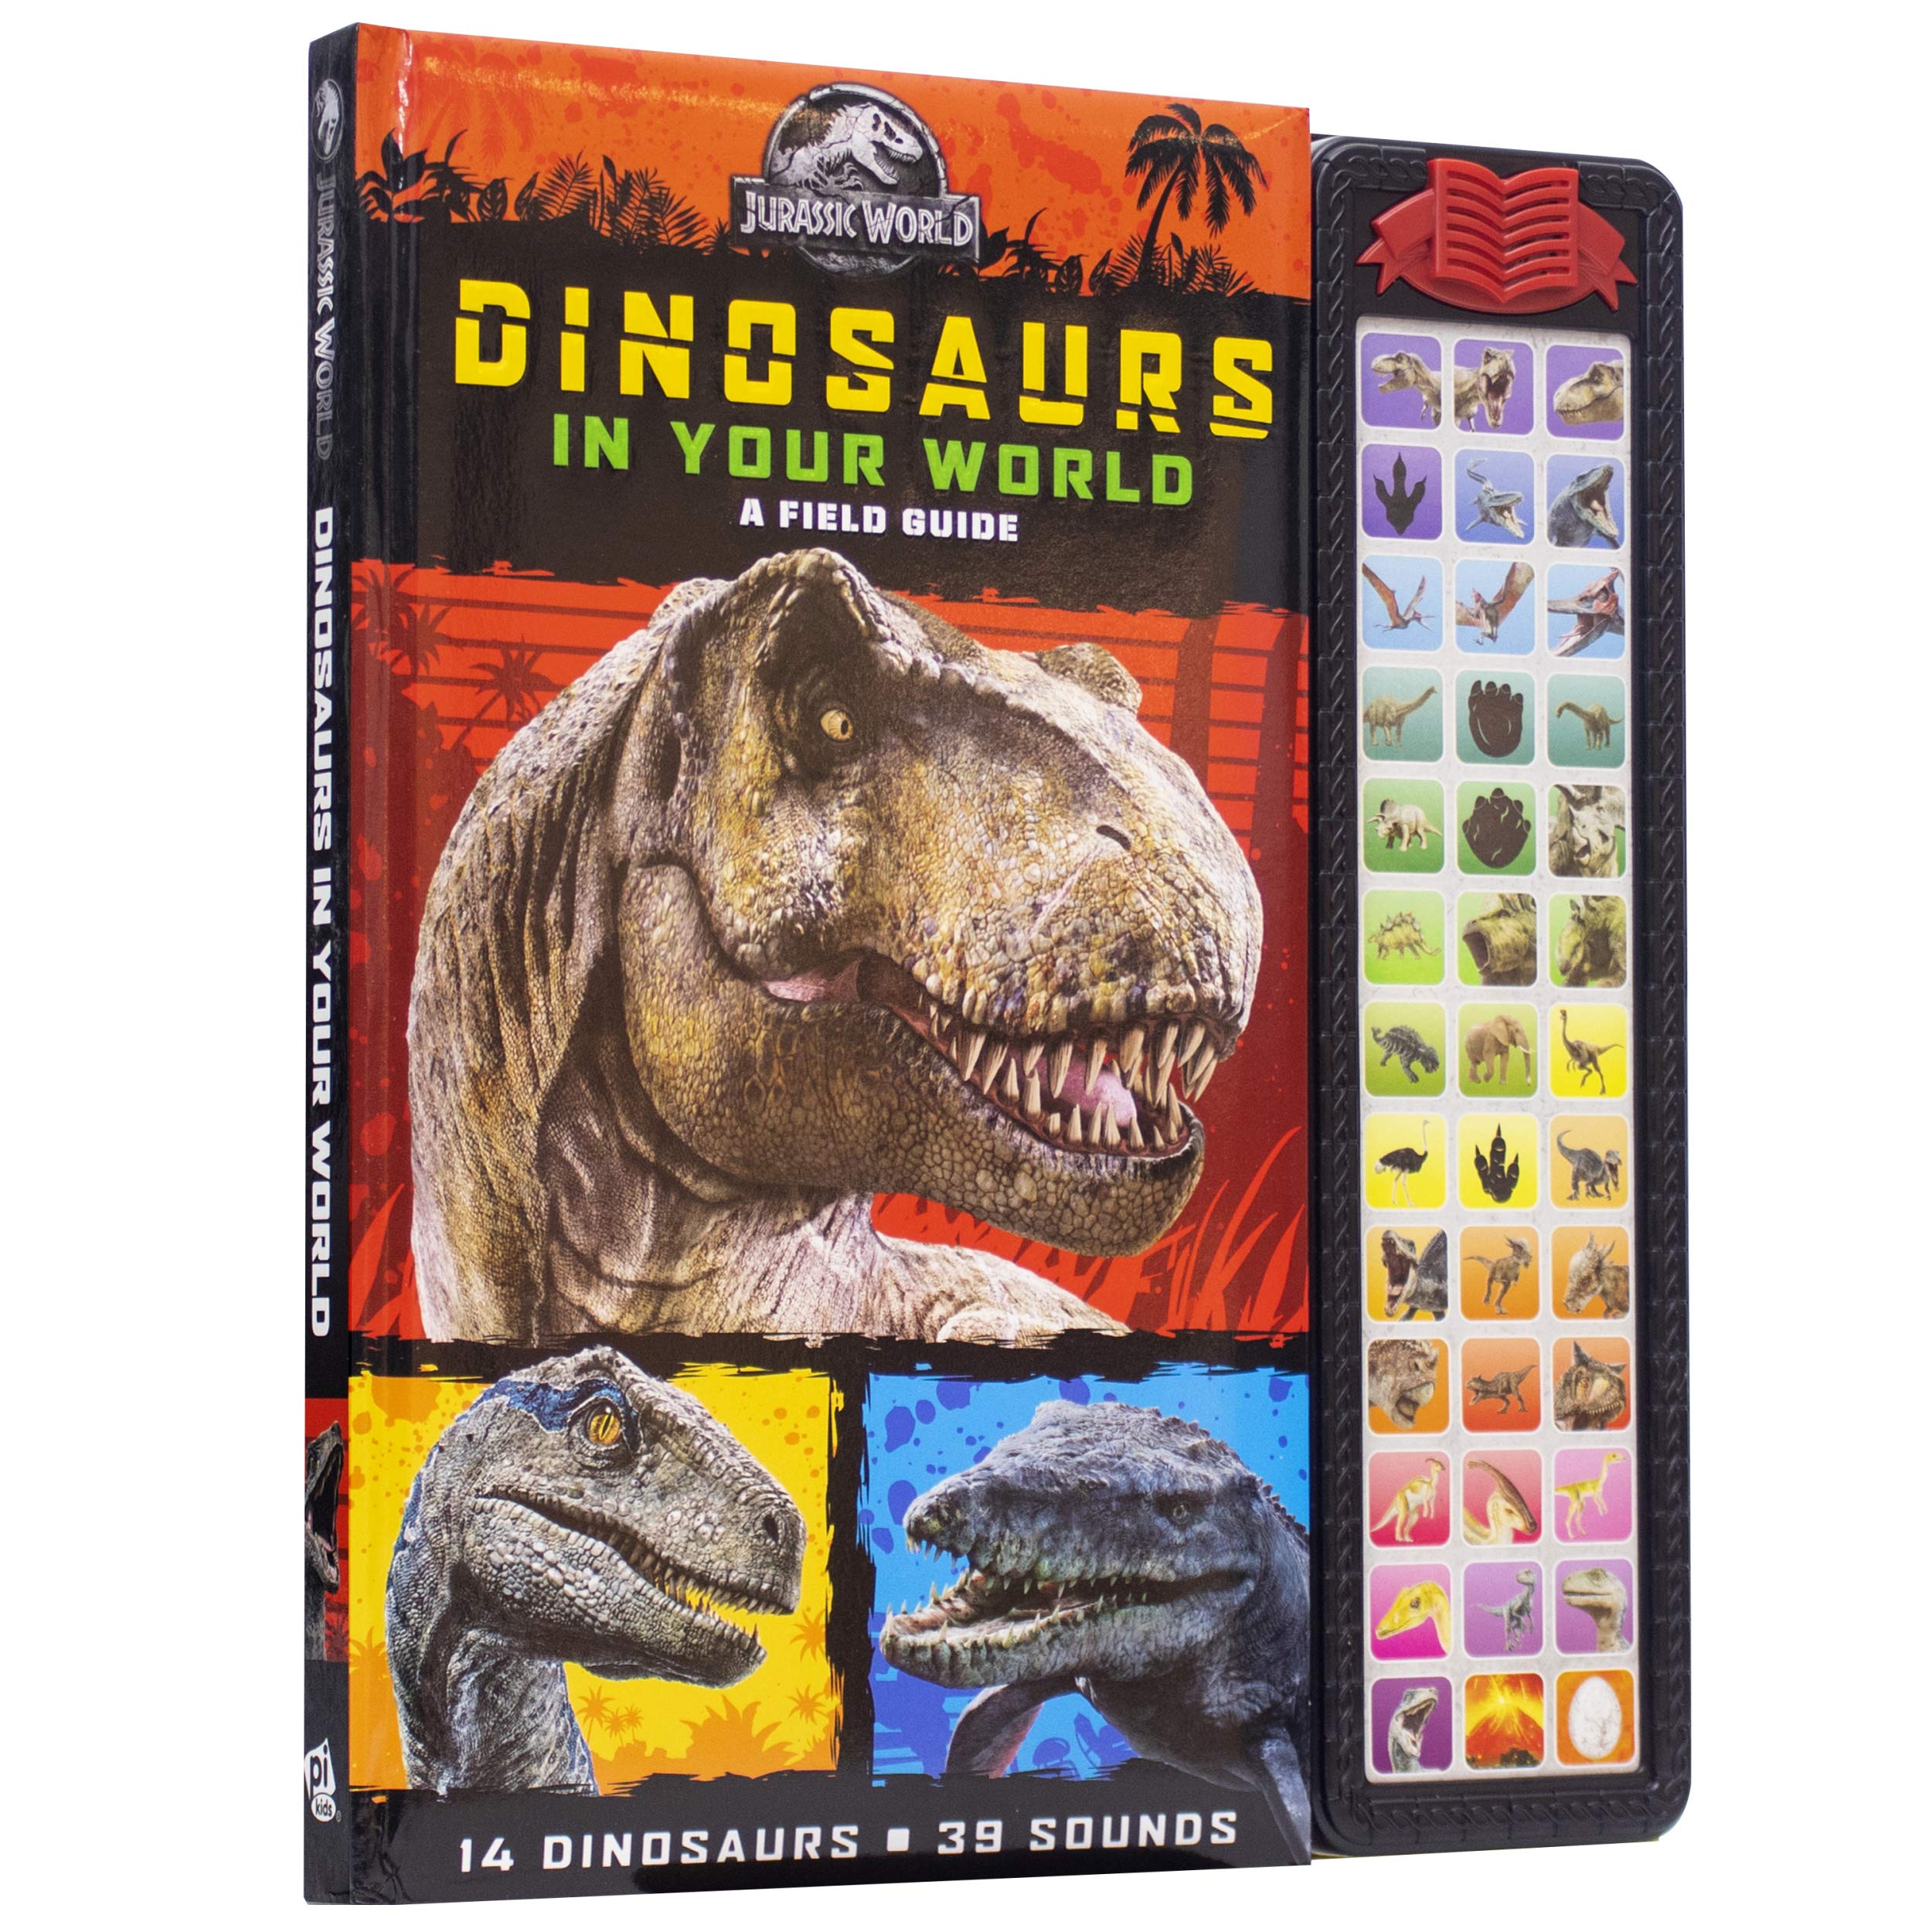 Jurassic World - Dinosaurs in Your World Field Guide - 39 Button Sound Book - PI Kids (Play-A-Sound)